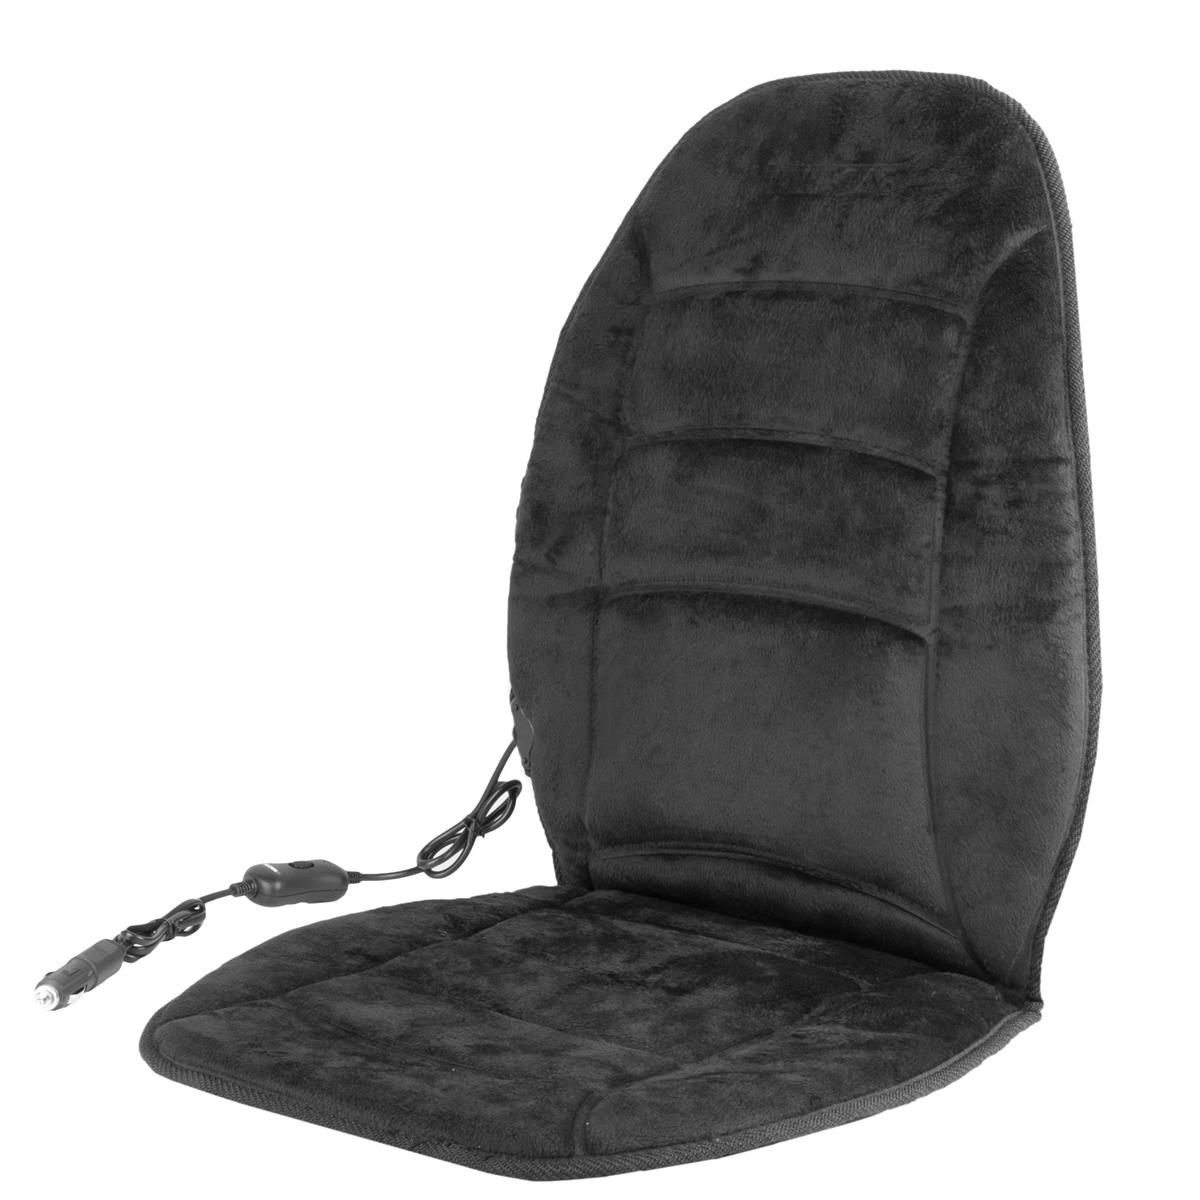 Image of Wagan Deluxe Velour Heated Seat Cushion